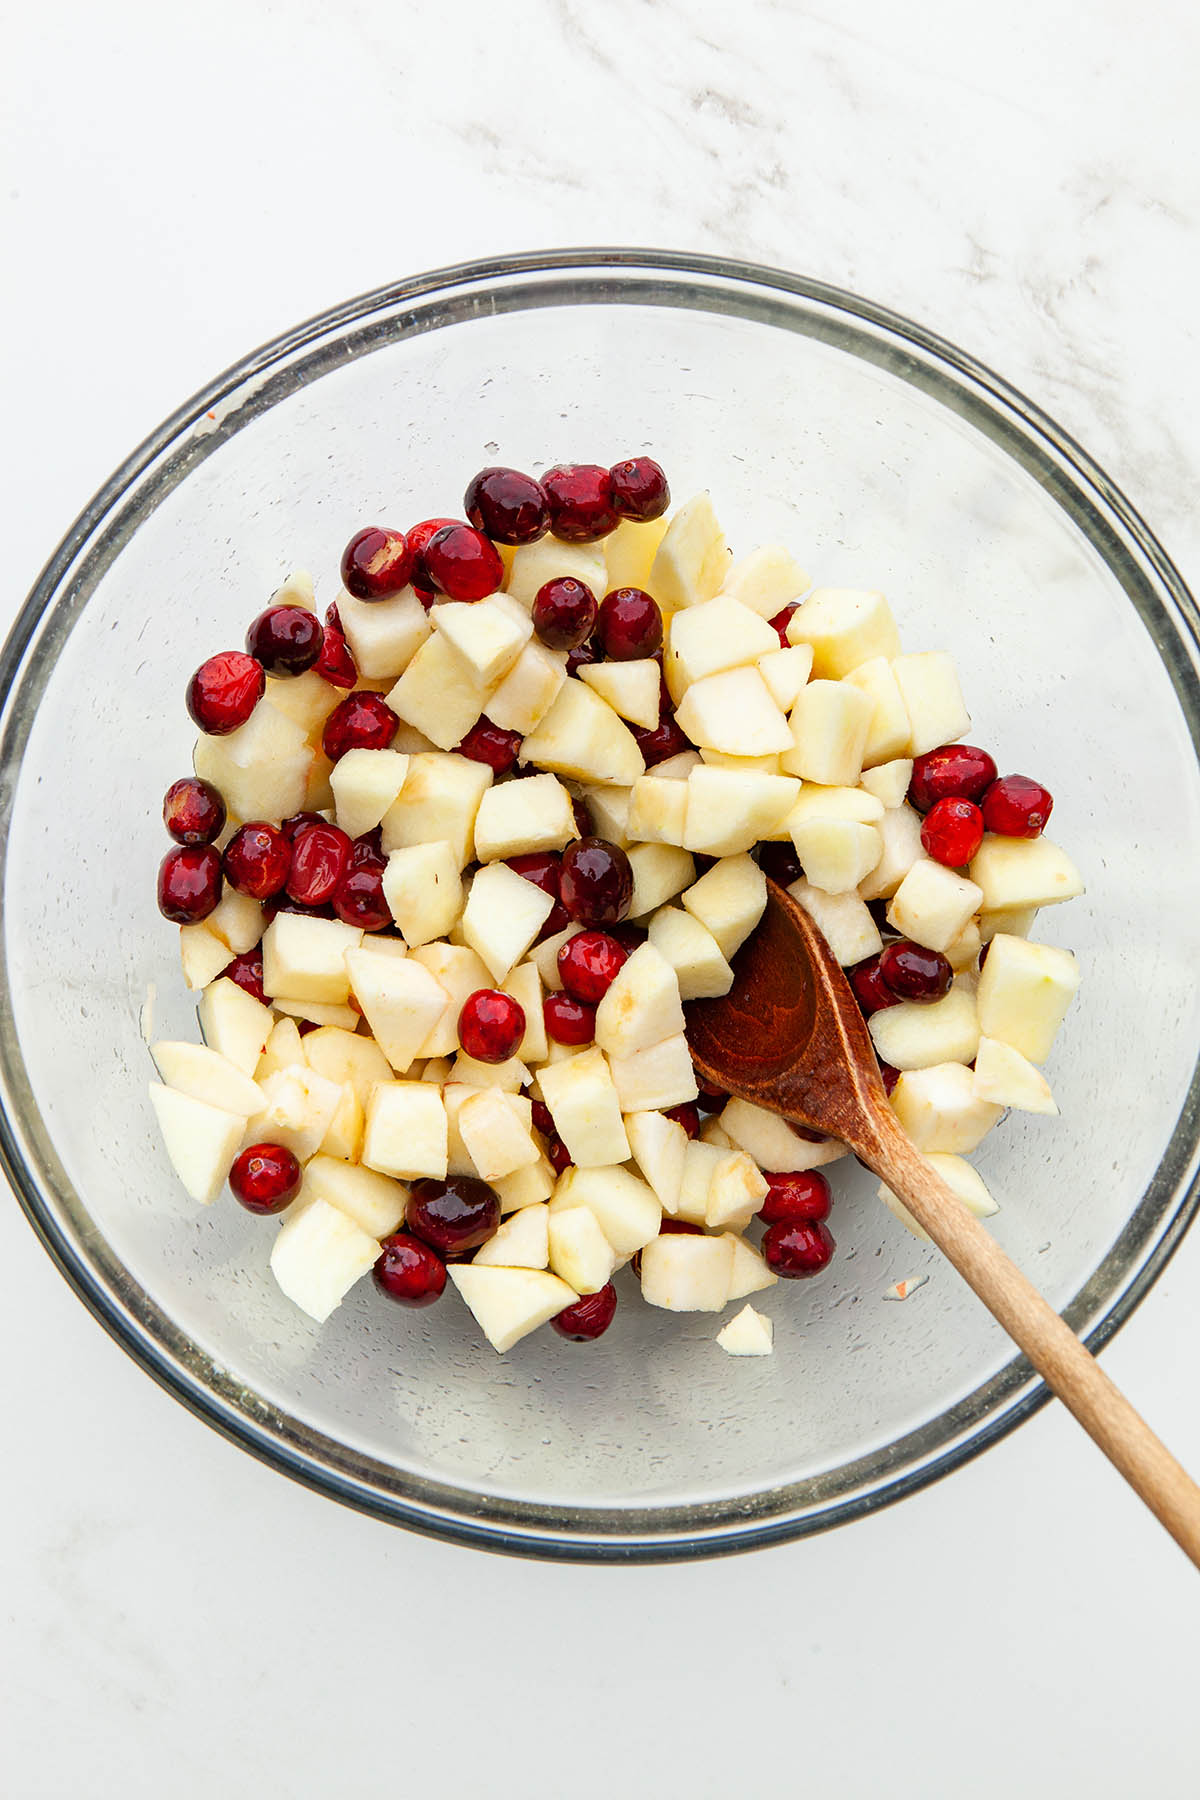 A large glass bowl of chopped apples and whole cranberries with a wooden spoon inside the bowl.